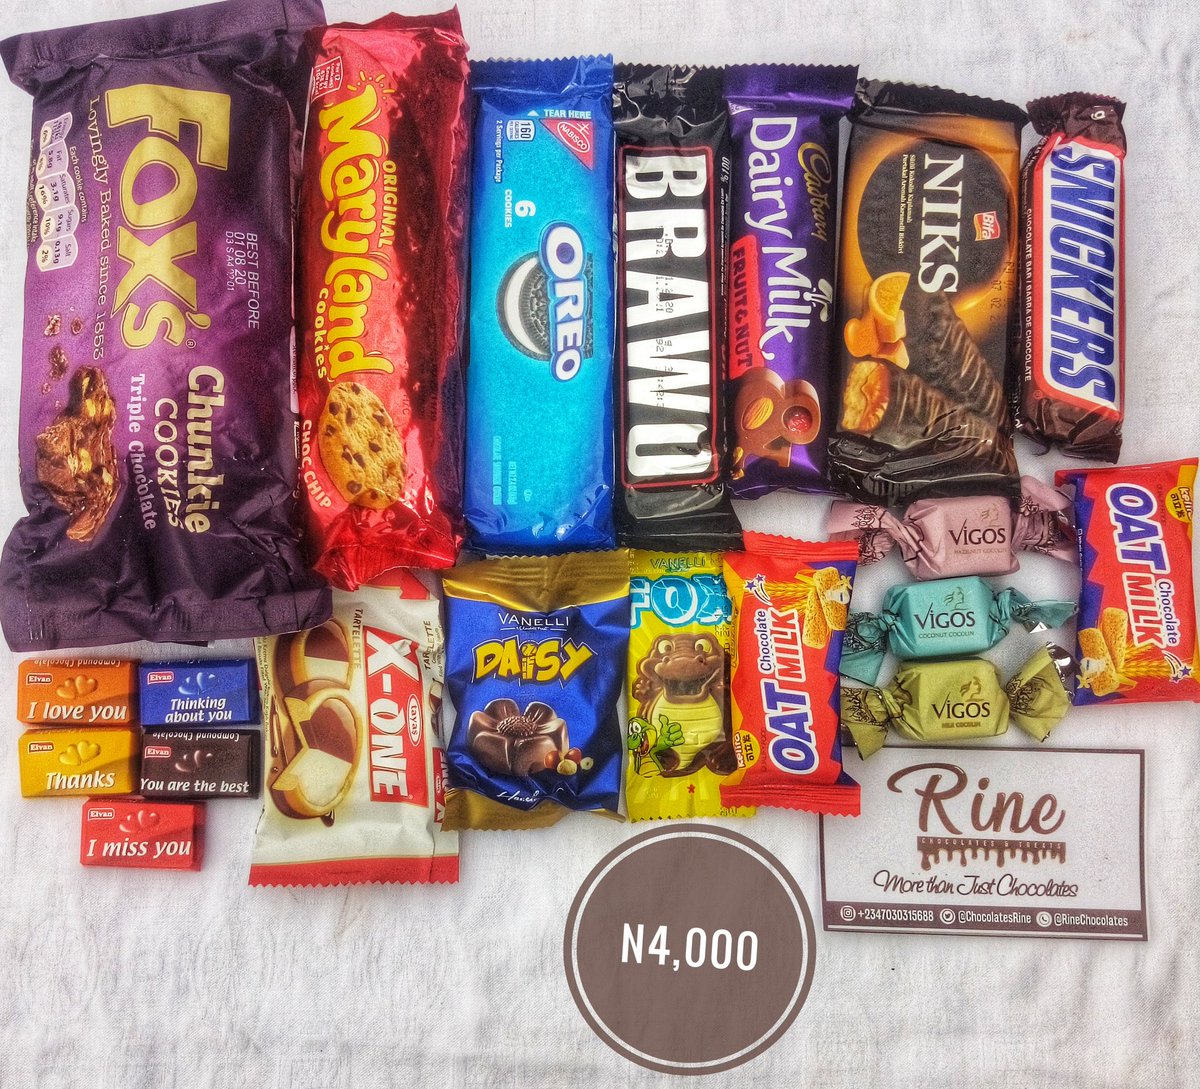 This is another type of our CONFAM ENJOYMENT Chocolate Box.It is 4000 naira.We can curate Yours according to Your preference.